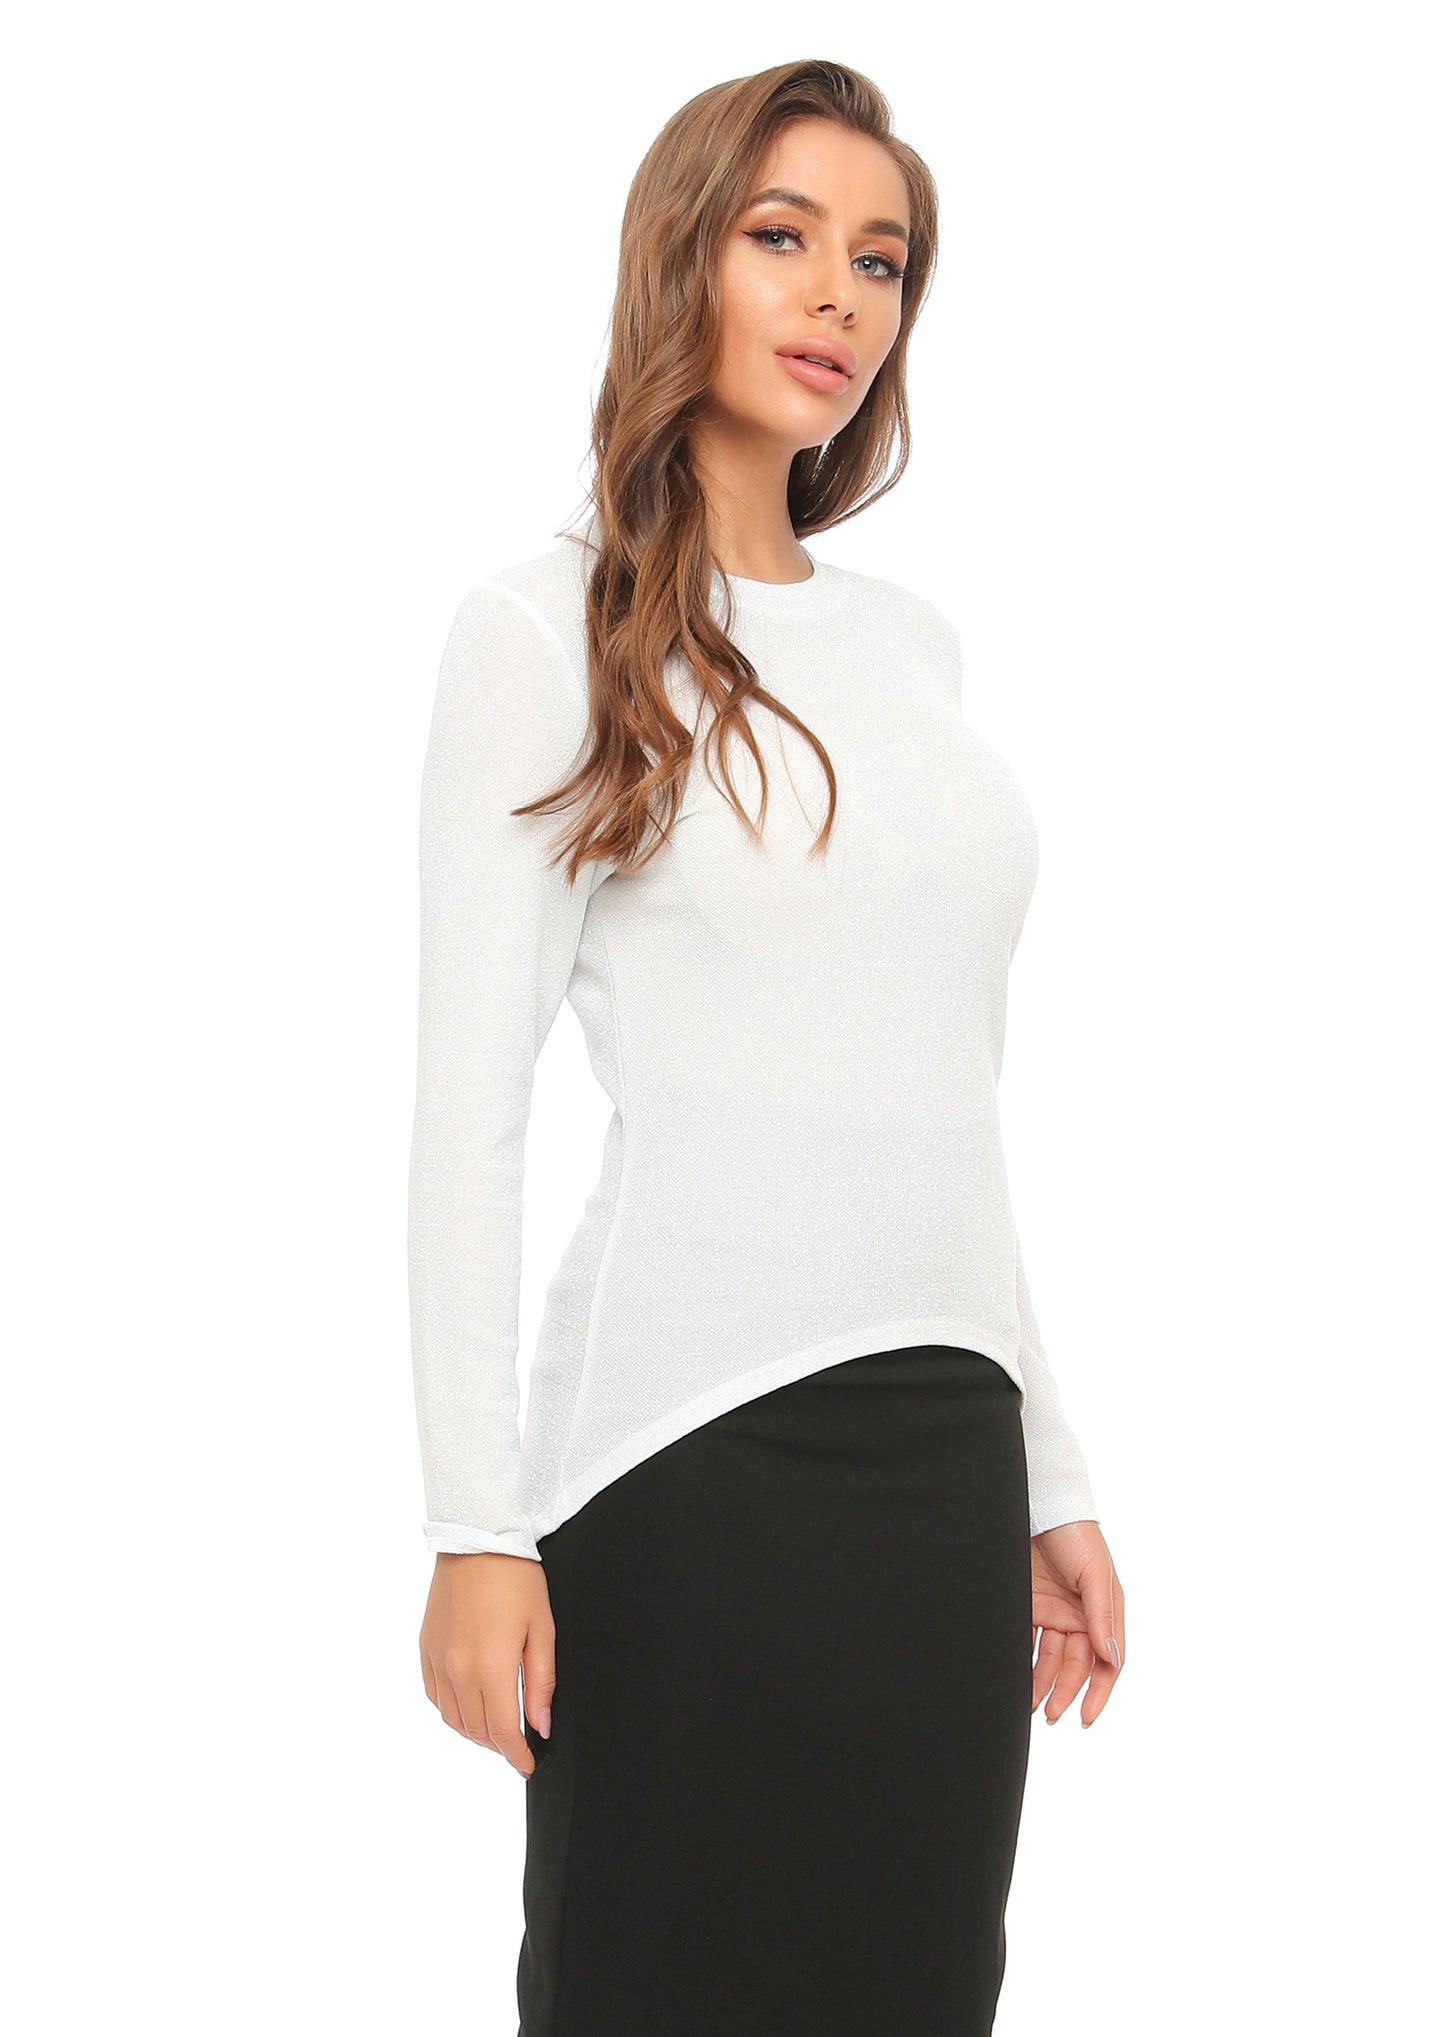 High & Low Shimmering Long Sleeve T Shirt - seilerlanguageservices